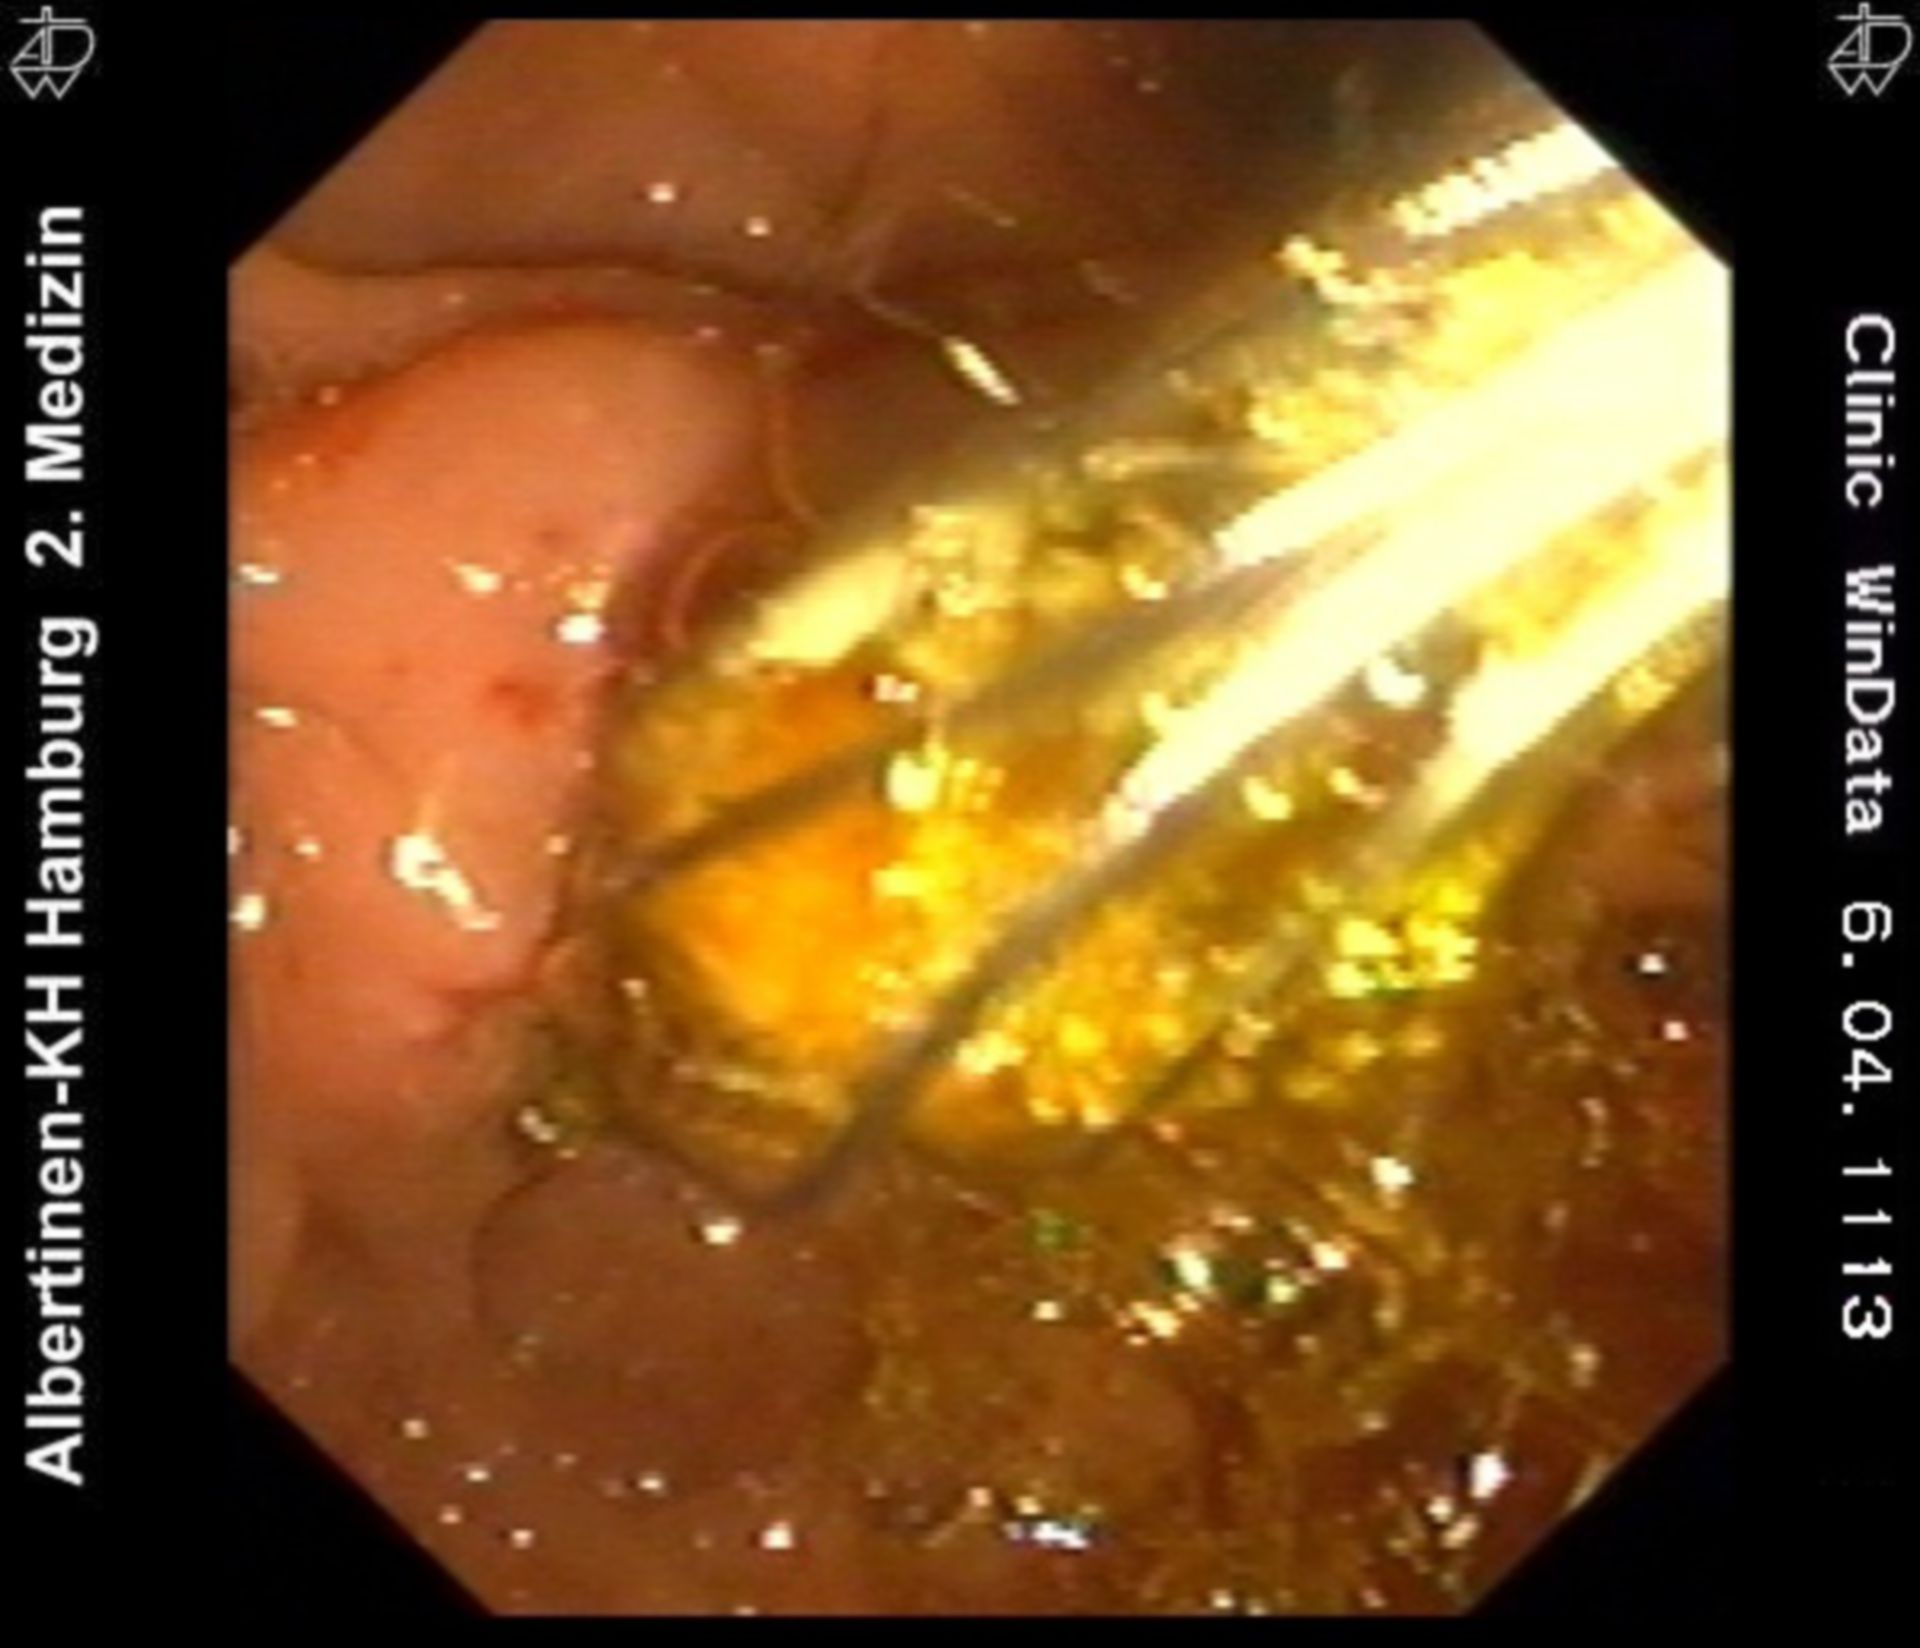 Removal of a cholesterol stone